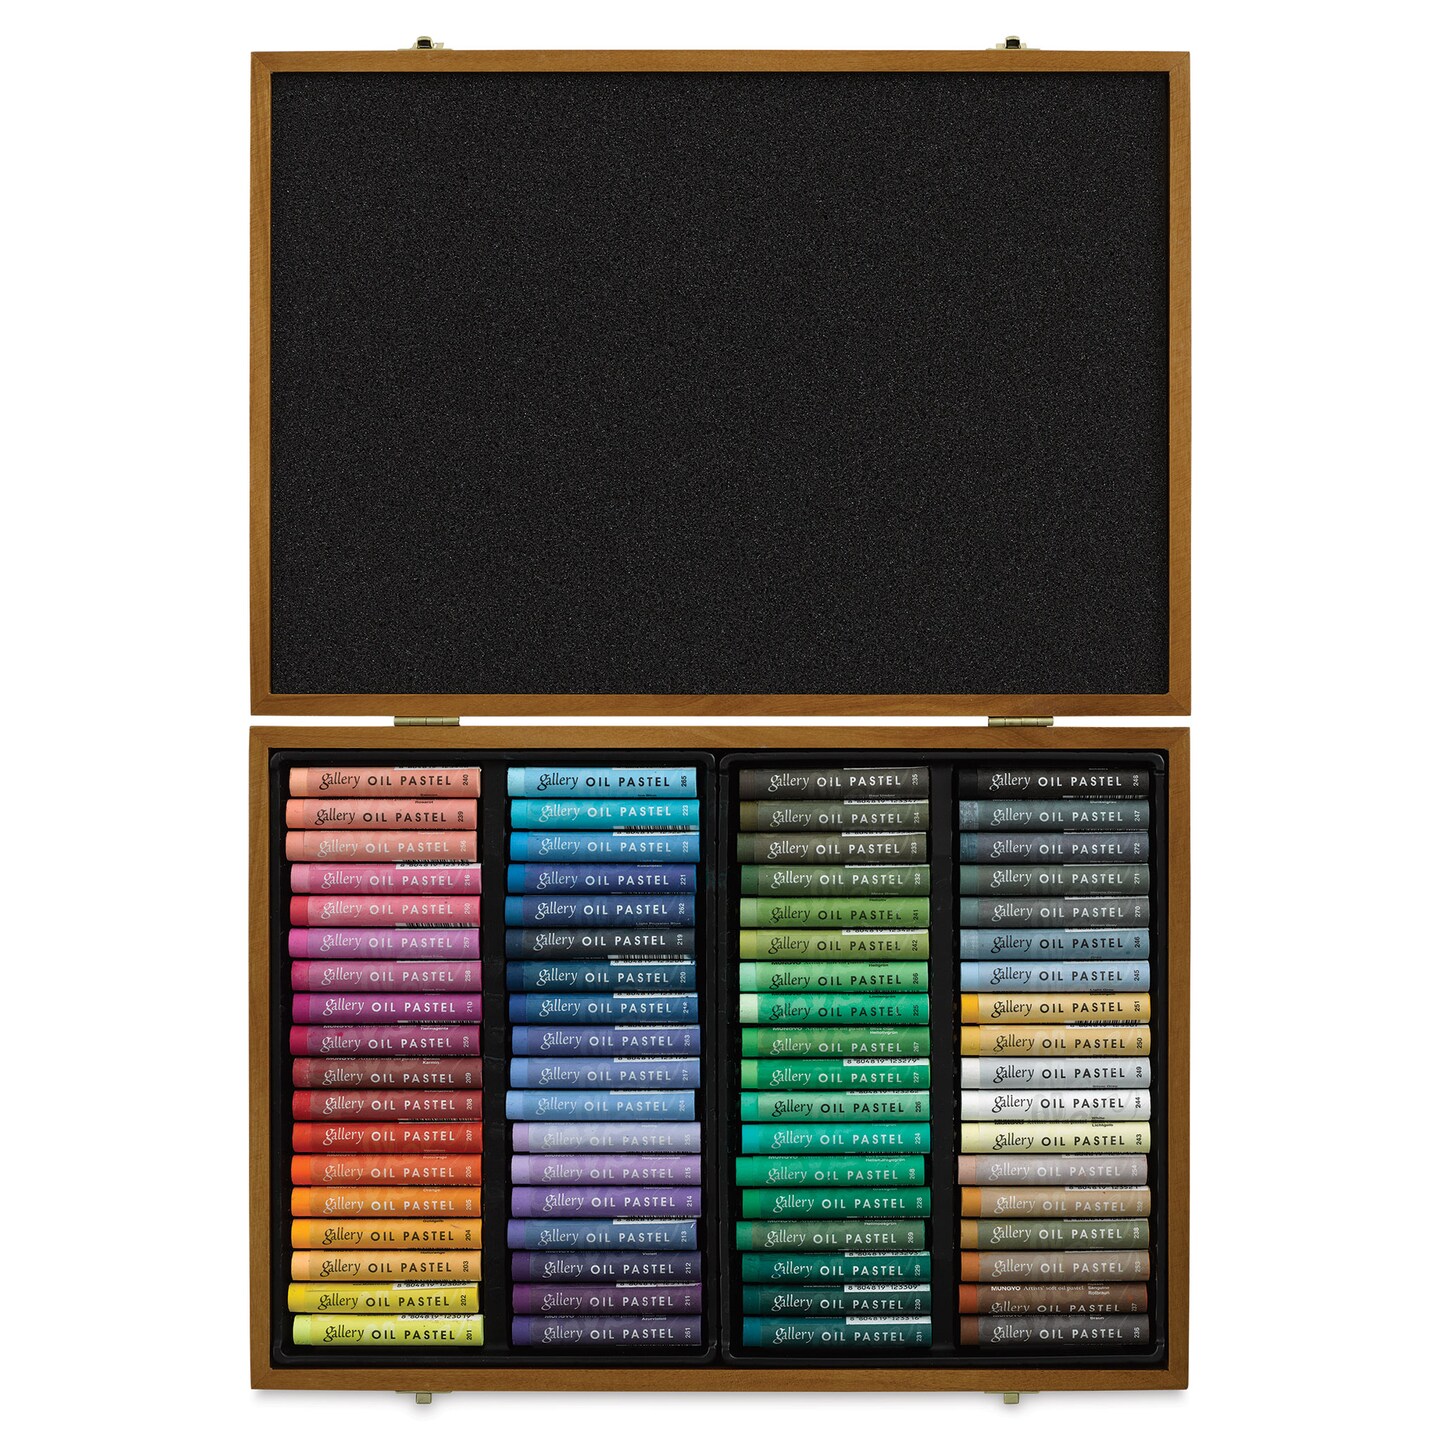 Mungyo Gallery Soft Oil Pastels Set of 72 - Assorted Colors (Professional  MOPV-72) 